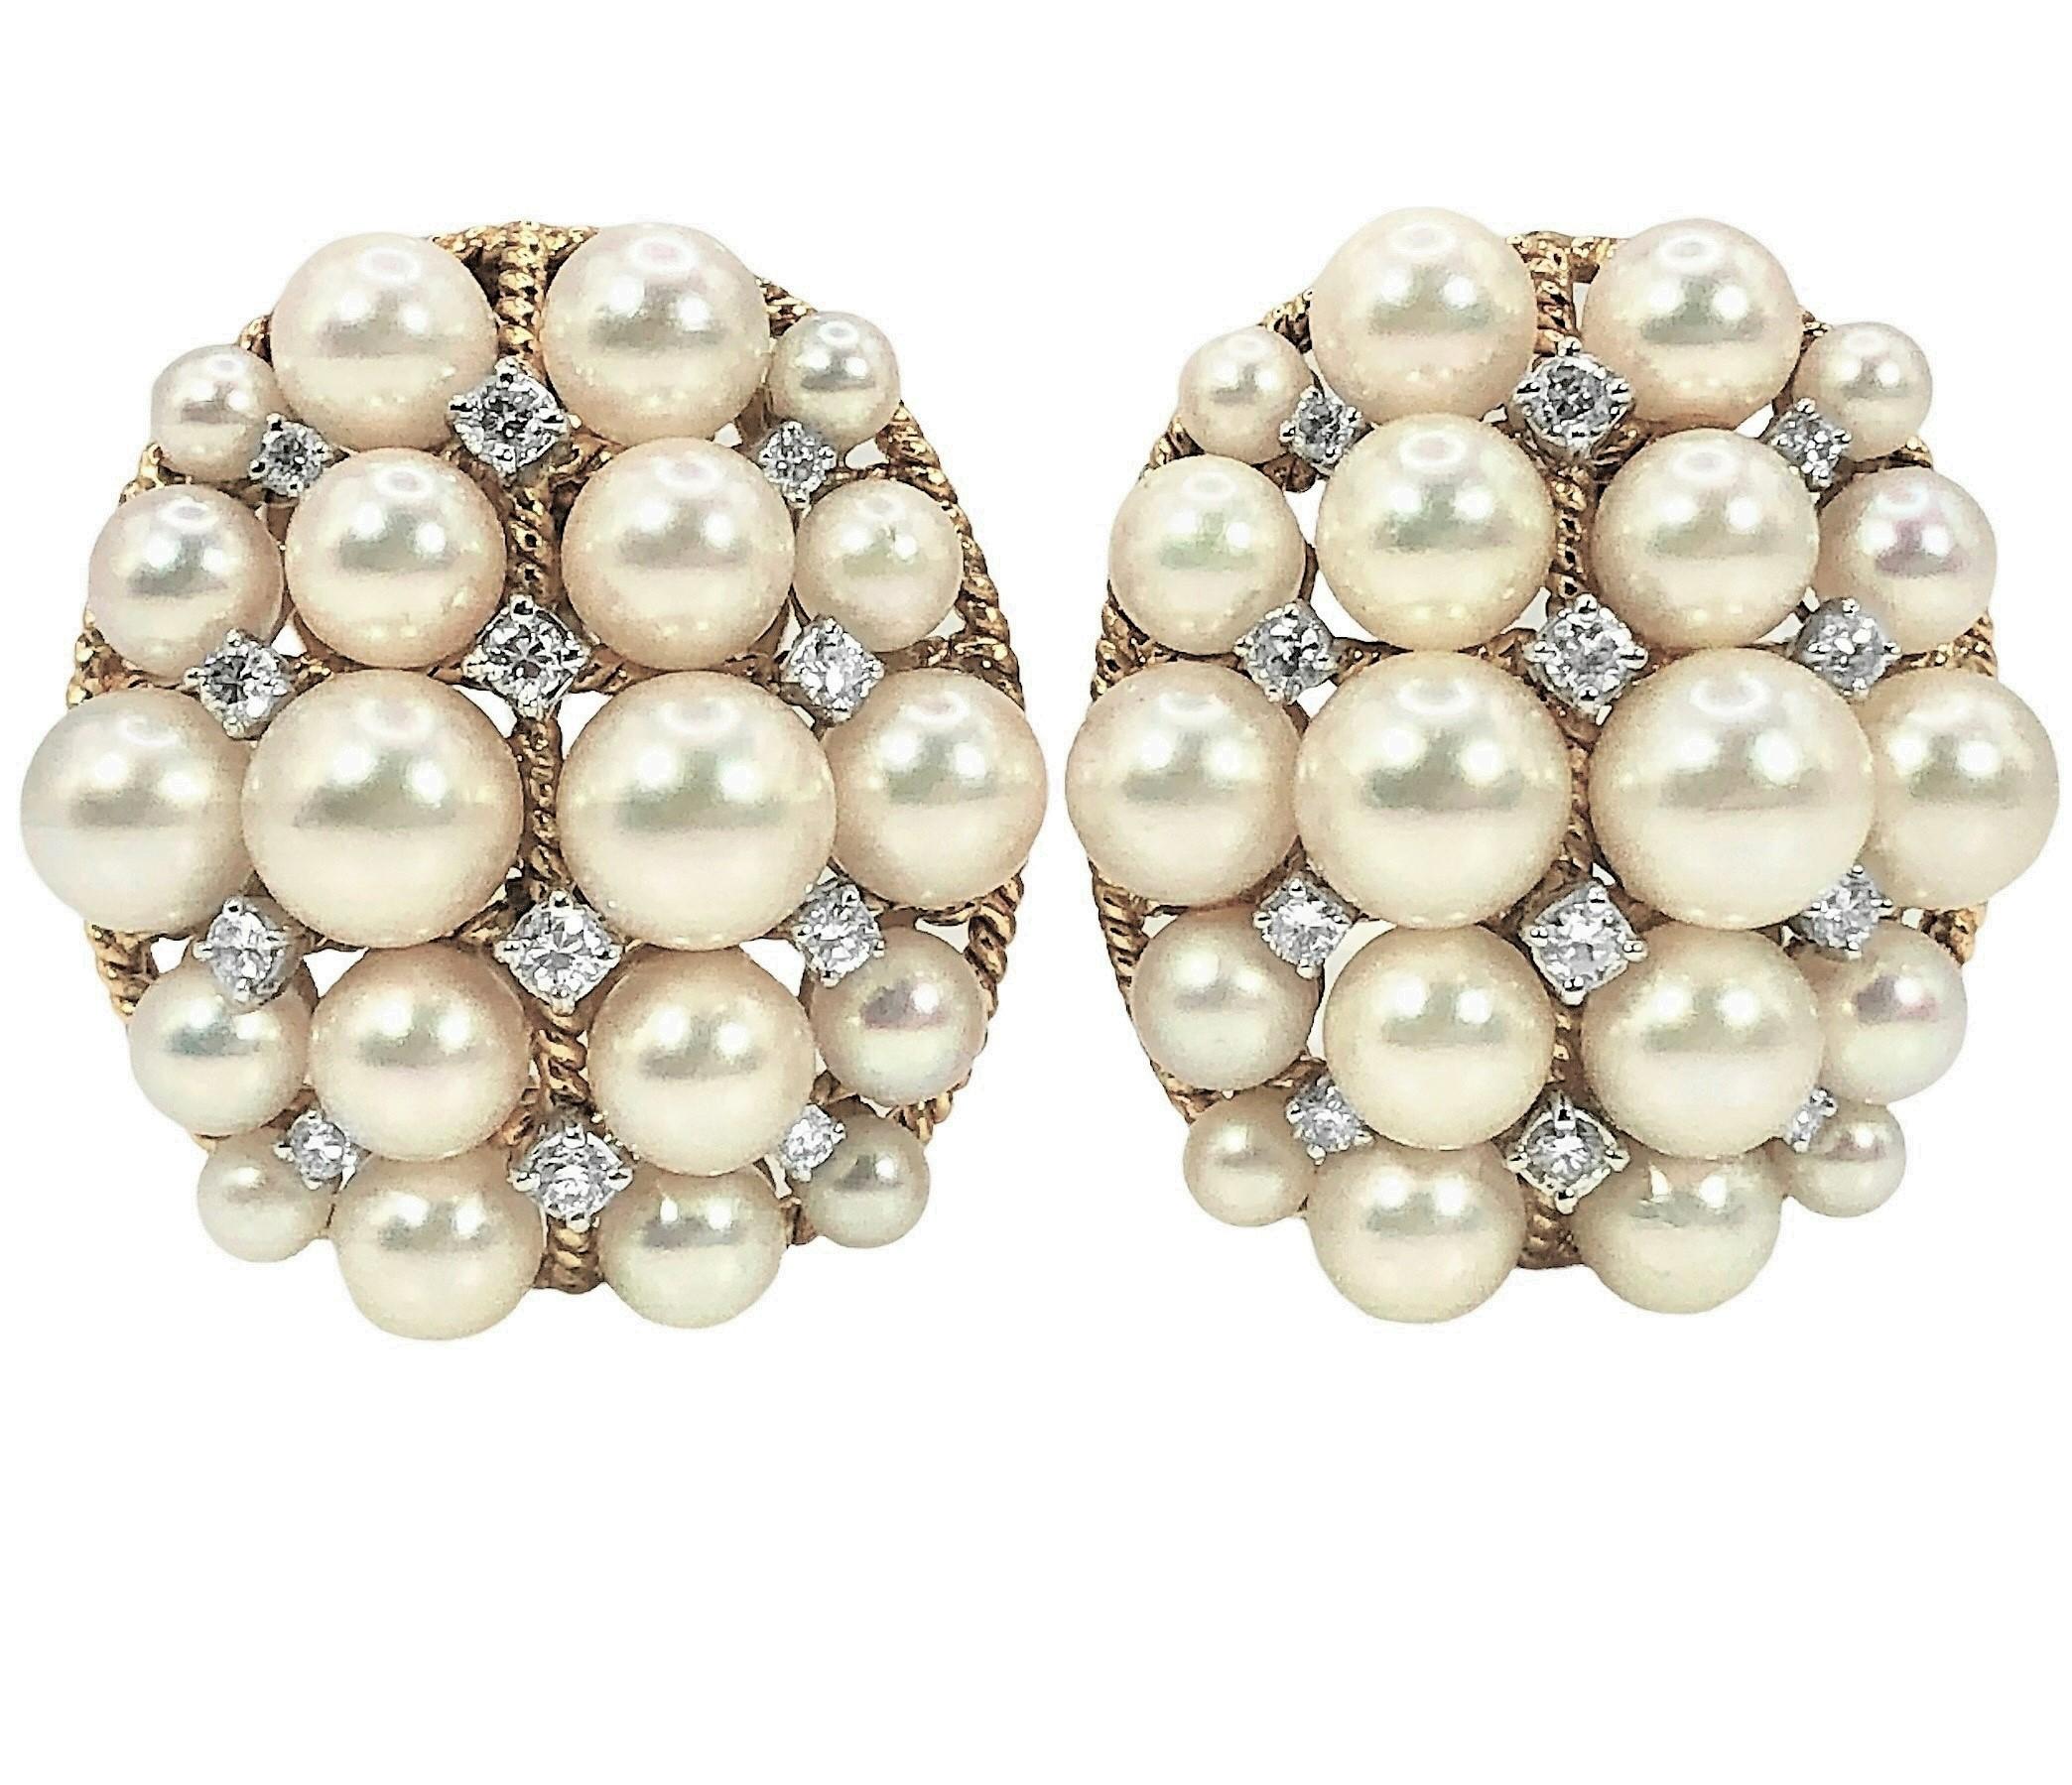 This classic pair of 18k gold, Akoya pearl and diamond earrings was crafted, presumably in Italy, and then imported and sold in France during the middle of the 20th century.  Each oval shaped earring measures 1 1/4 inches by 1  1/8 inches and is